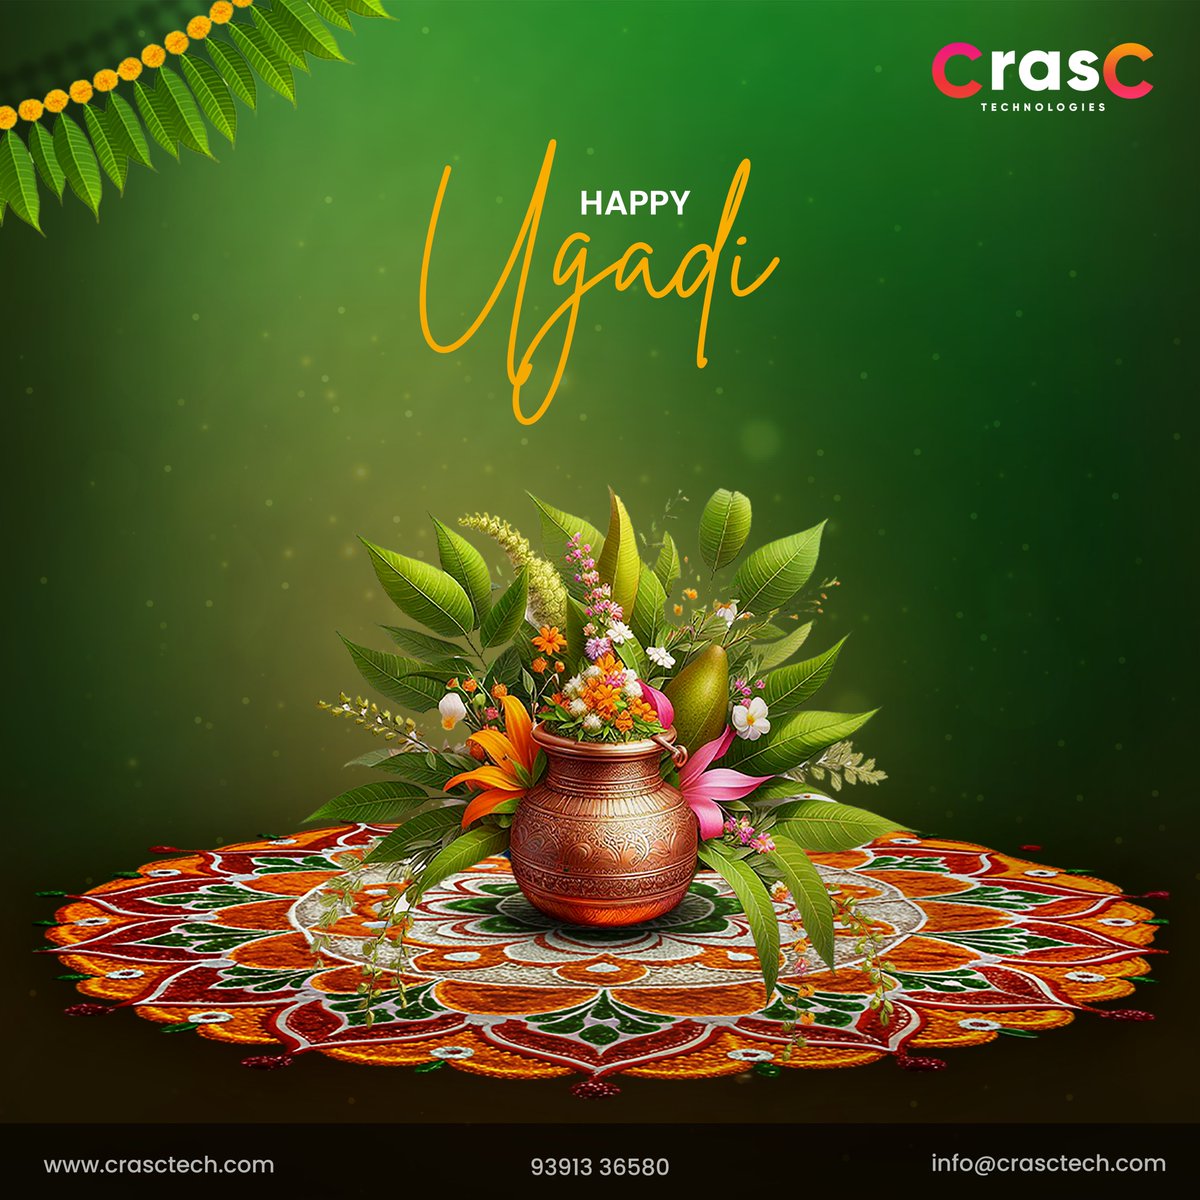 🌼 Sending warm wishes to Crasctech on this auspicious occasion of Ugadi!🌿 🎊 May your year be filled with blessings and positivity. 😇 #crasctech #digitalmarketing #socialmediamarketing #Ugadi #HappyUgadi #2024festival #joyness #aupiciousoccasion #festival #festivalvibes